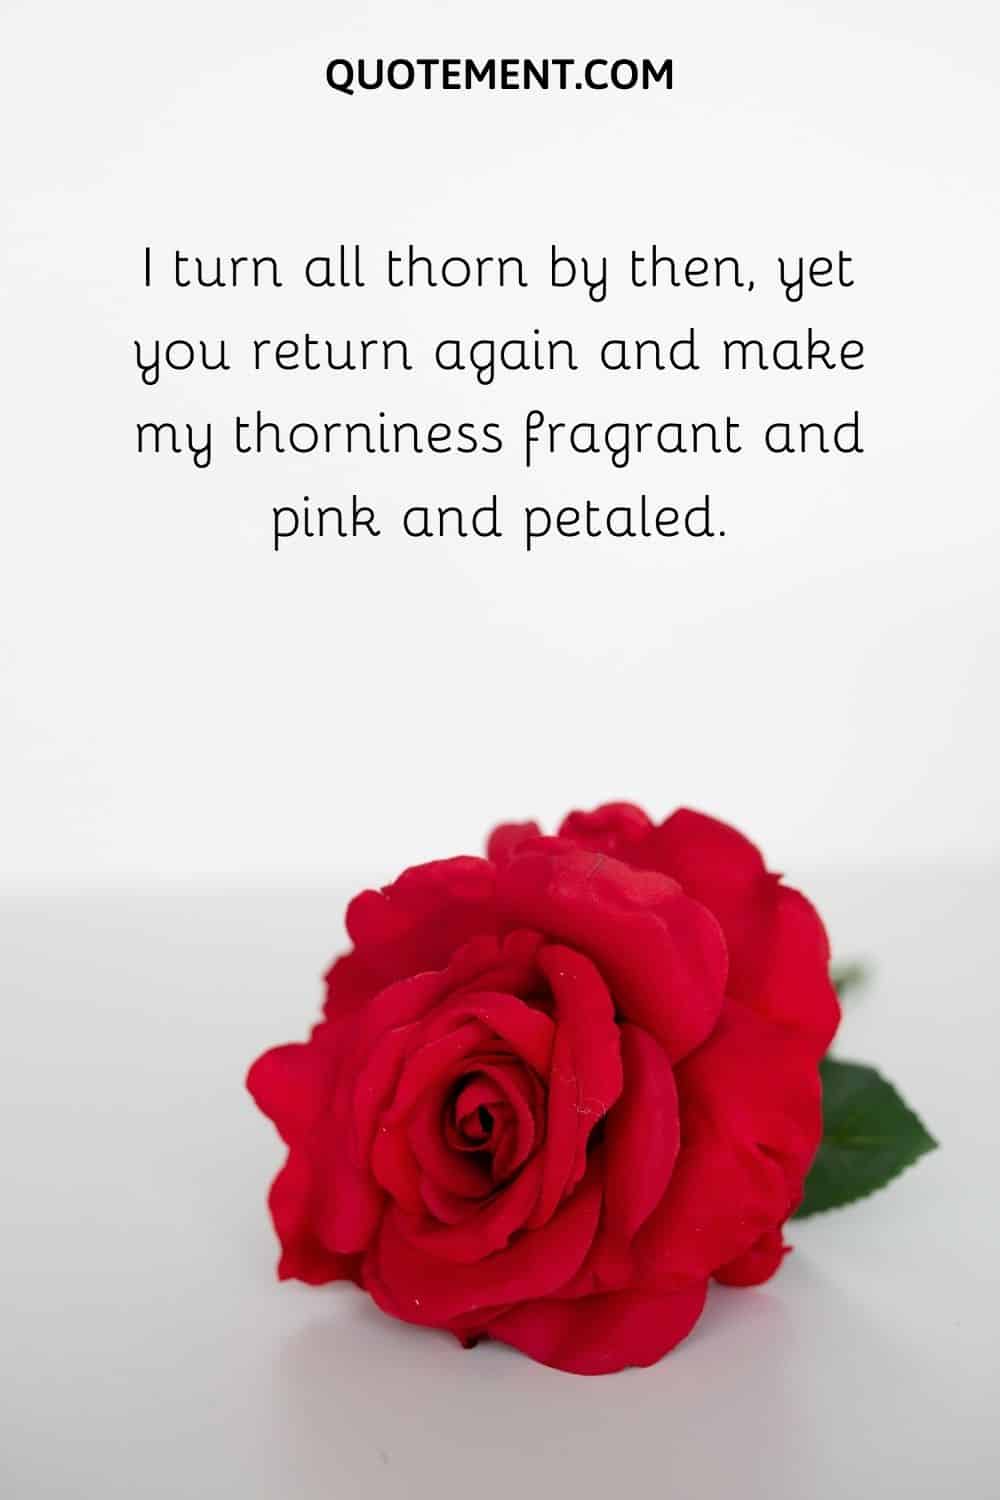 I turn all thorn by then, yet you return again and make my thorniness fragrant and pink and petaled.